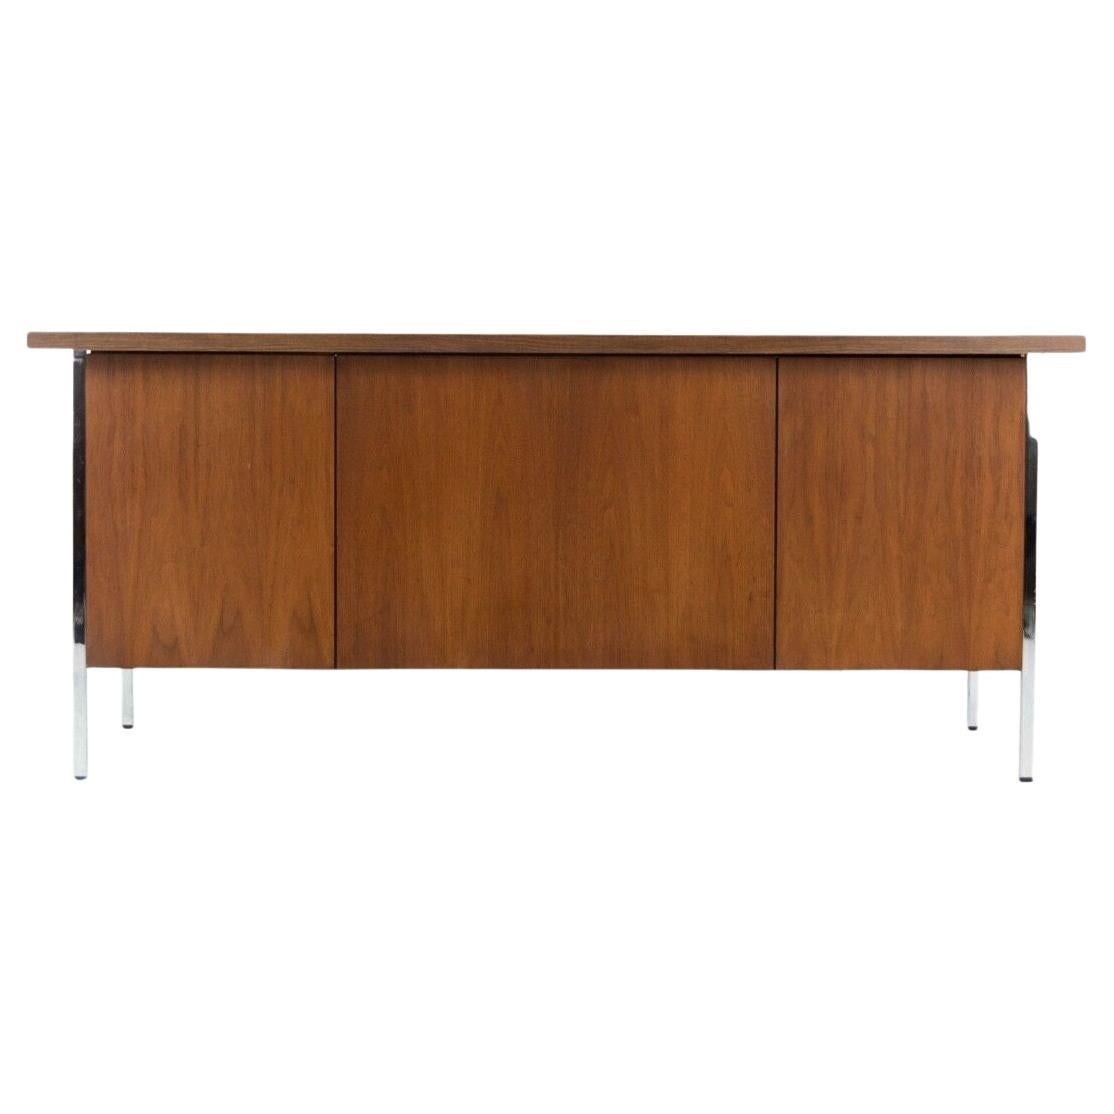 1950s Florence Knoll Double Pedestal Walnut Chrome and Laminate Executive Desk For Sale